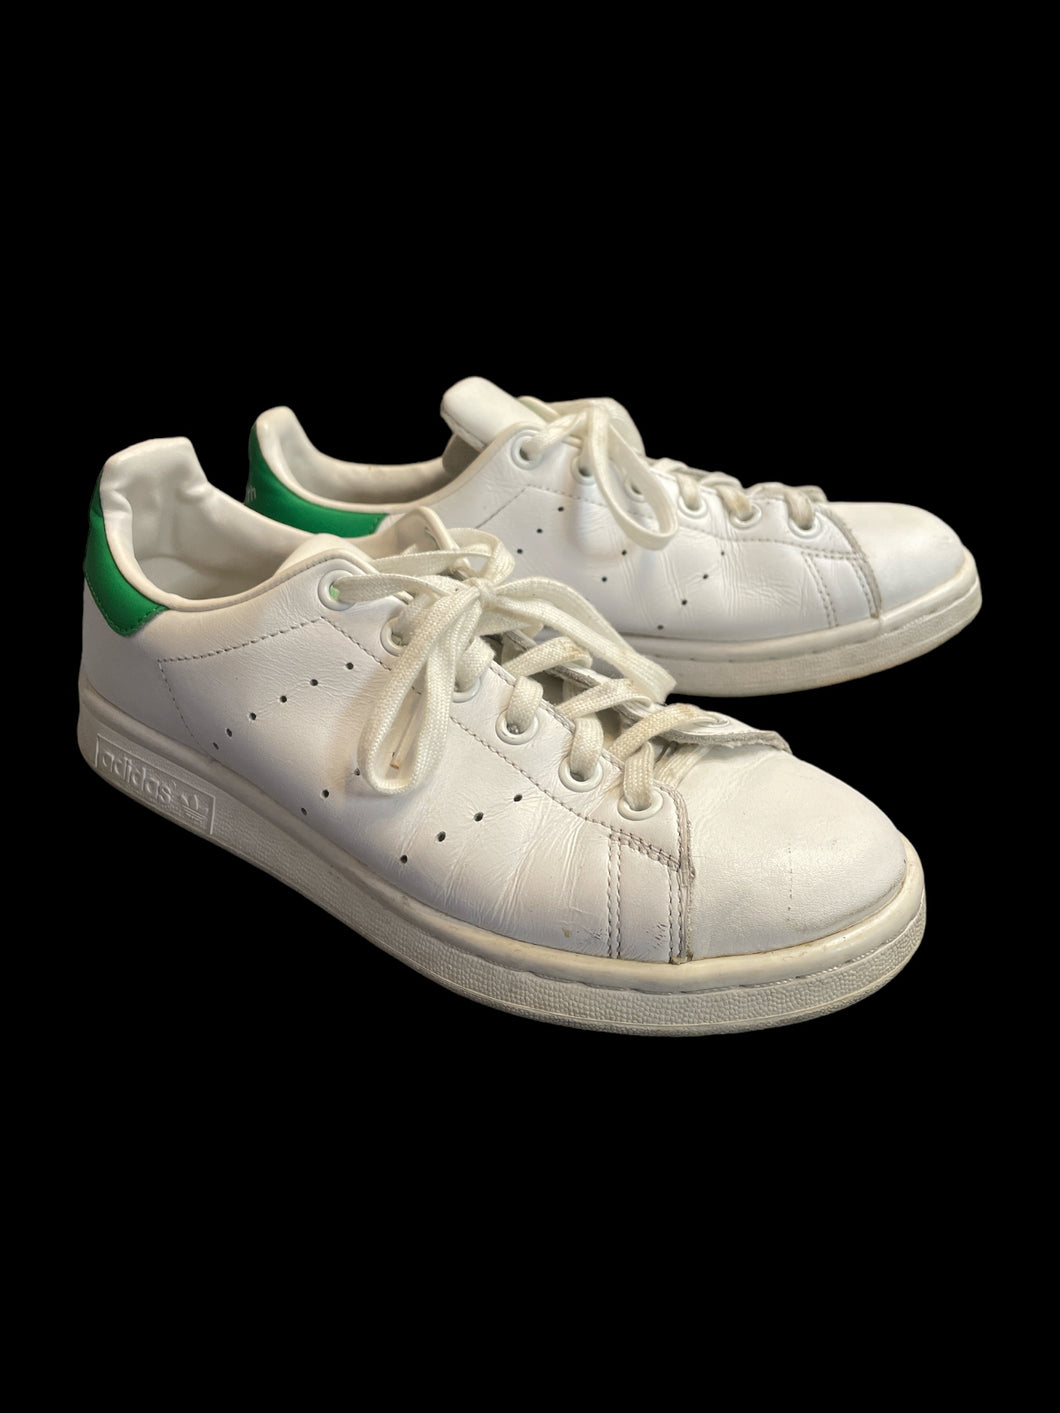 sensibilidad tenis vistazo 5M/6.5W White & green “Stan Smith” Adidas lace-up sneakers – Witch Bitch  Thrift